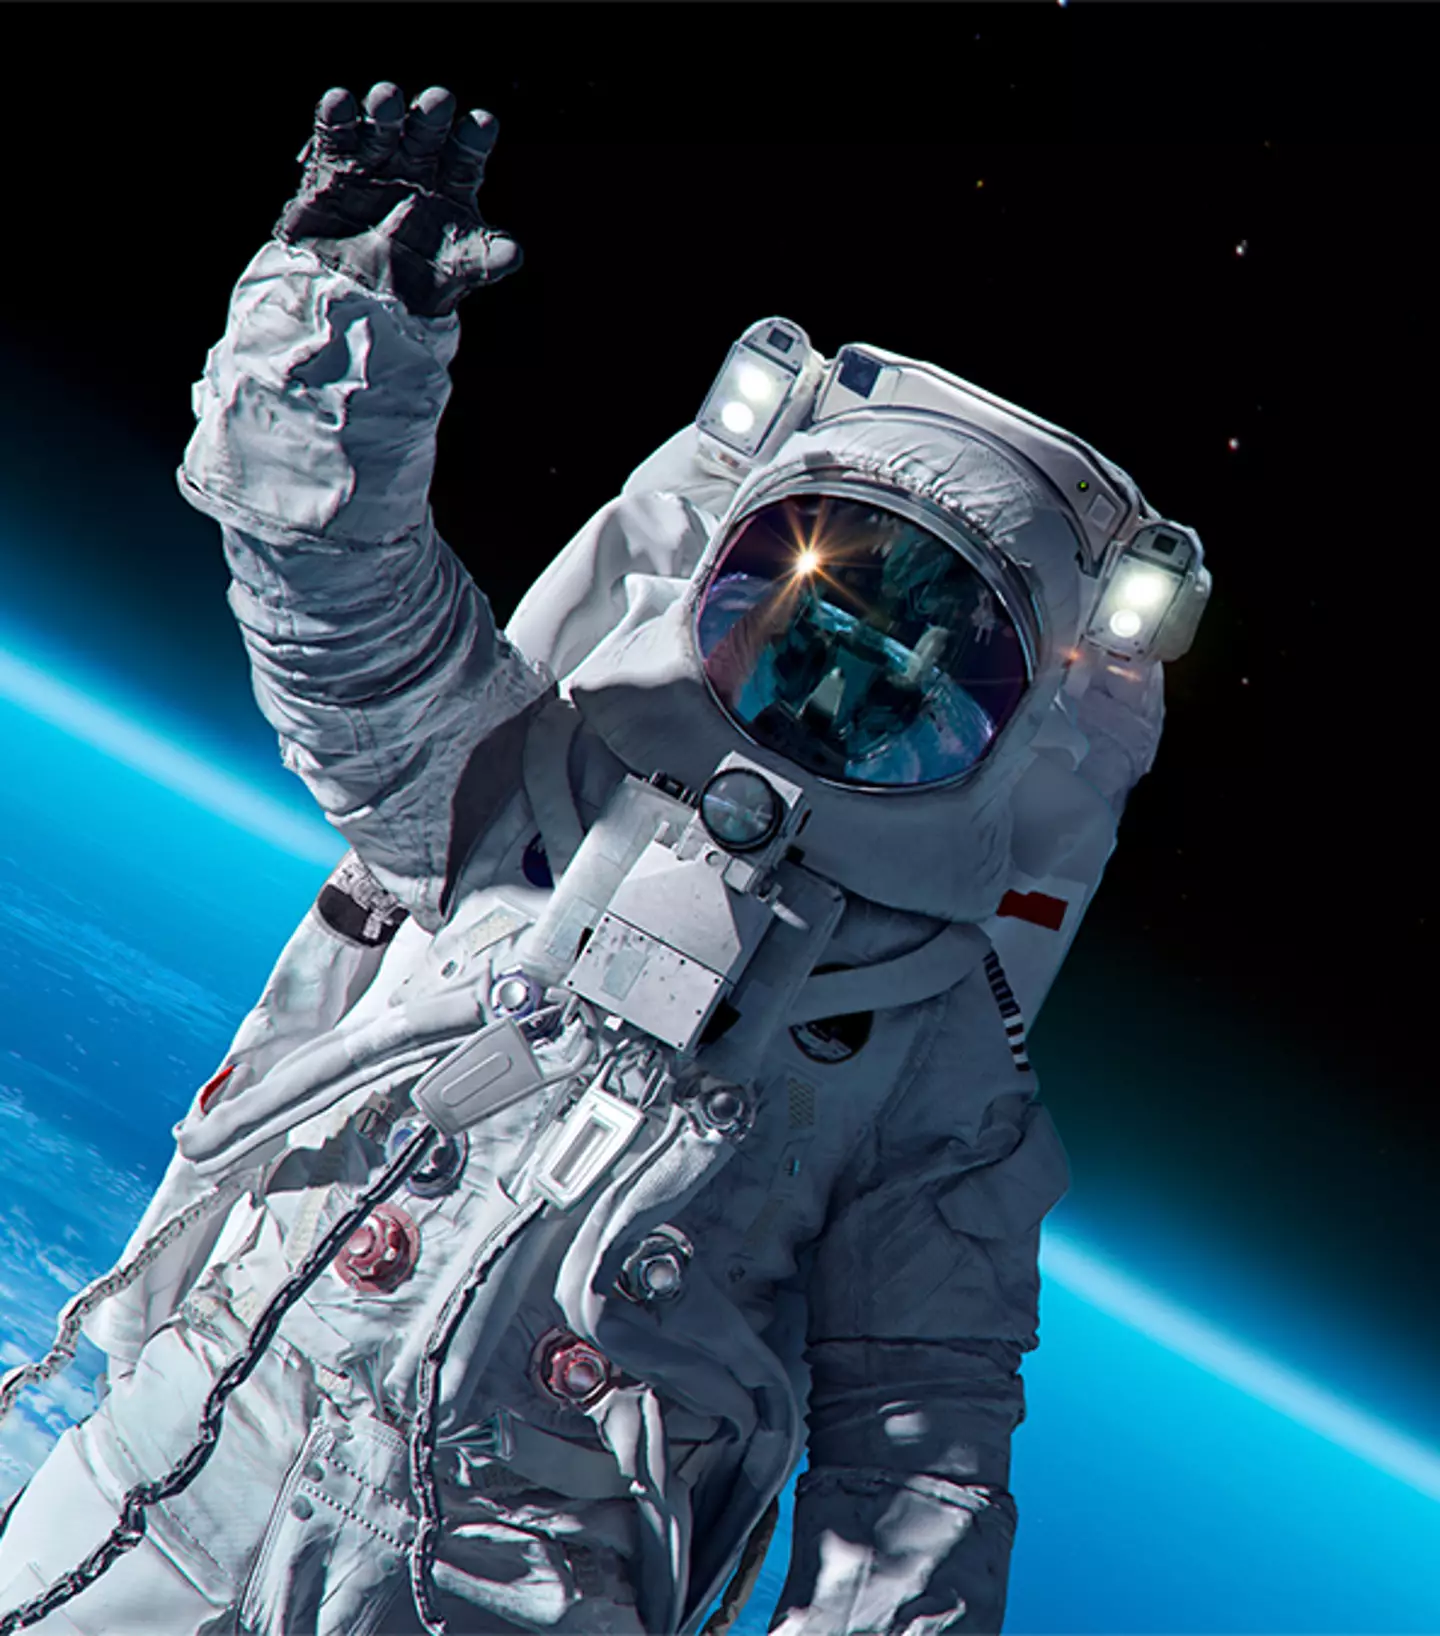 Being an astronaut is one of the most dangerous jobs you could choose. / Alexander Spatari / quantic69 / Getty